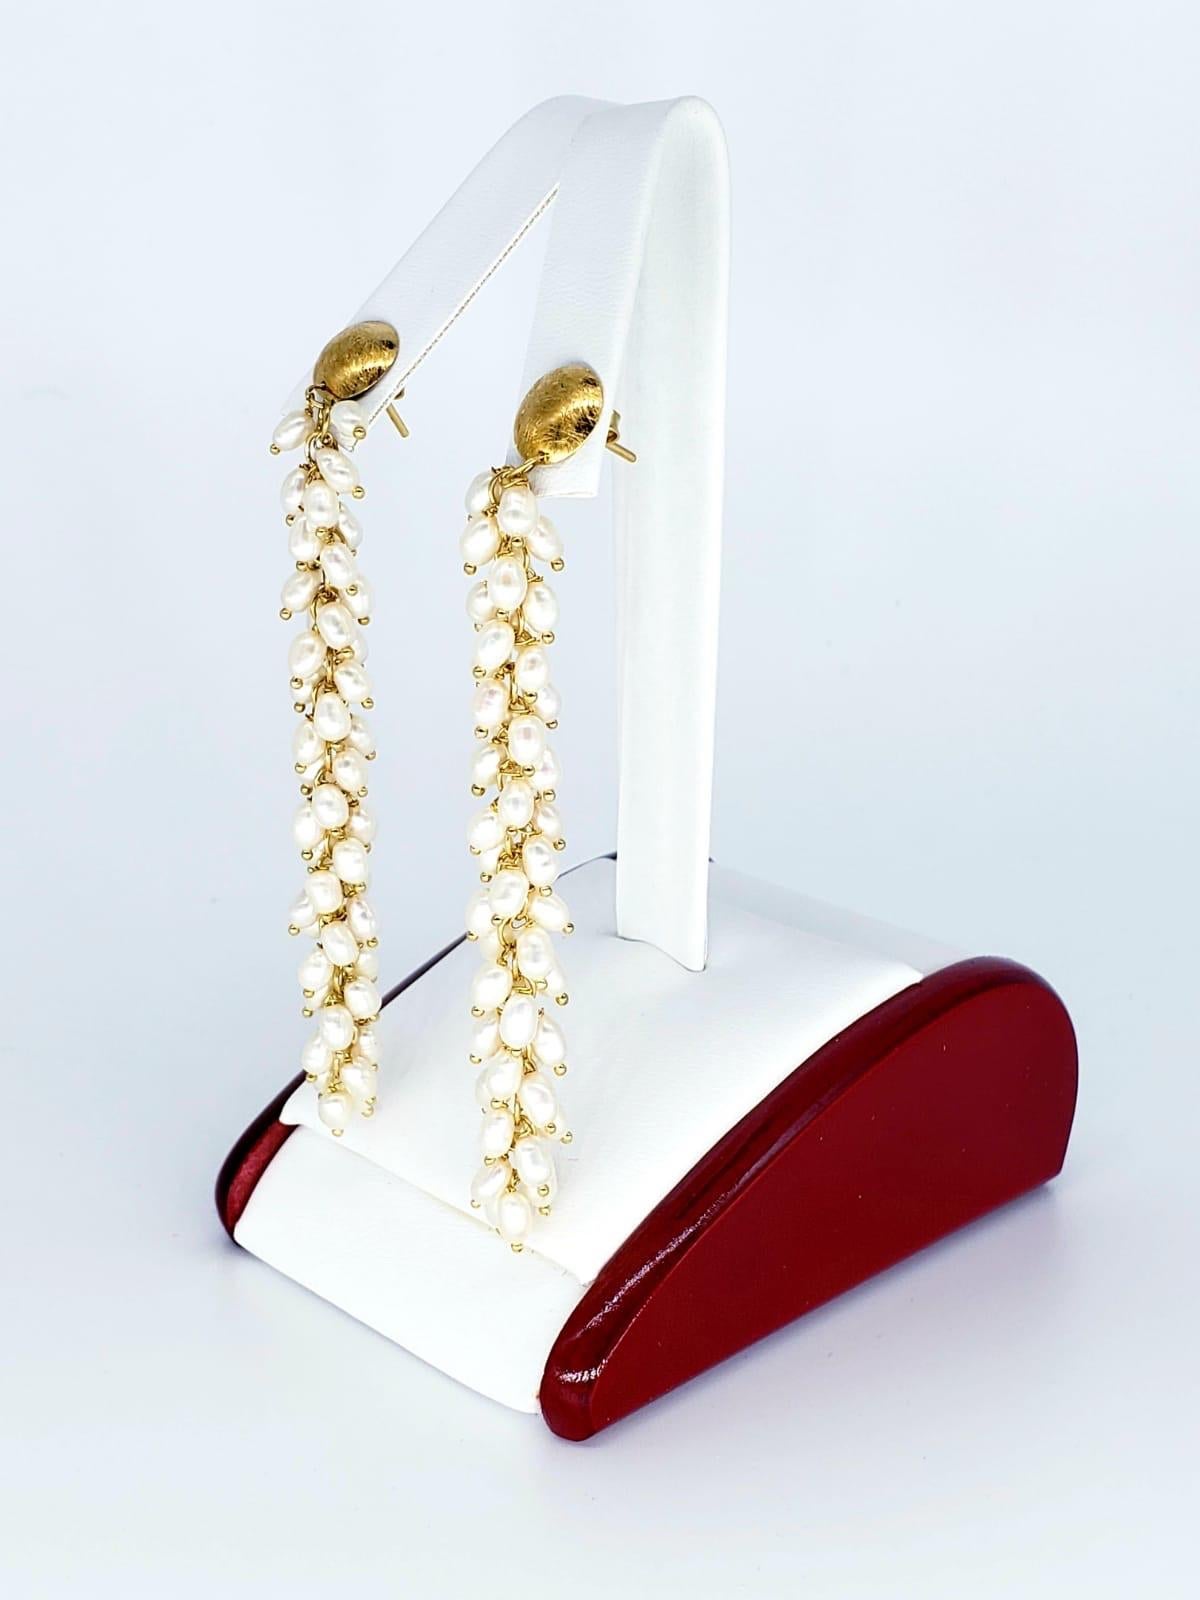 Vintage Freshwater Sea Pearls Dangling Drop Earrings 18k Gold. The earrings are 3” Tall & weight 12.5g